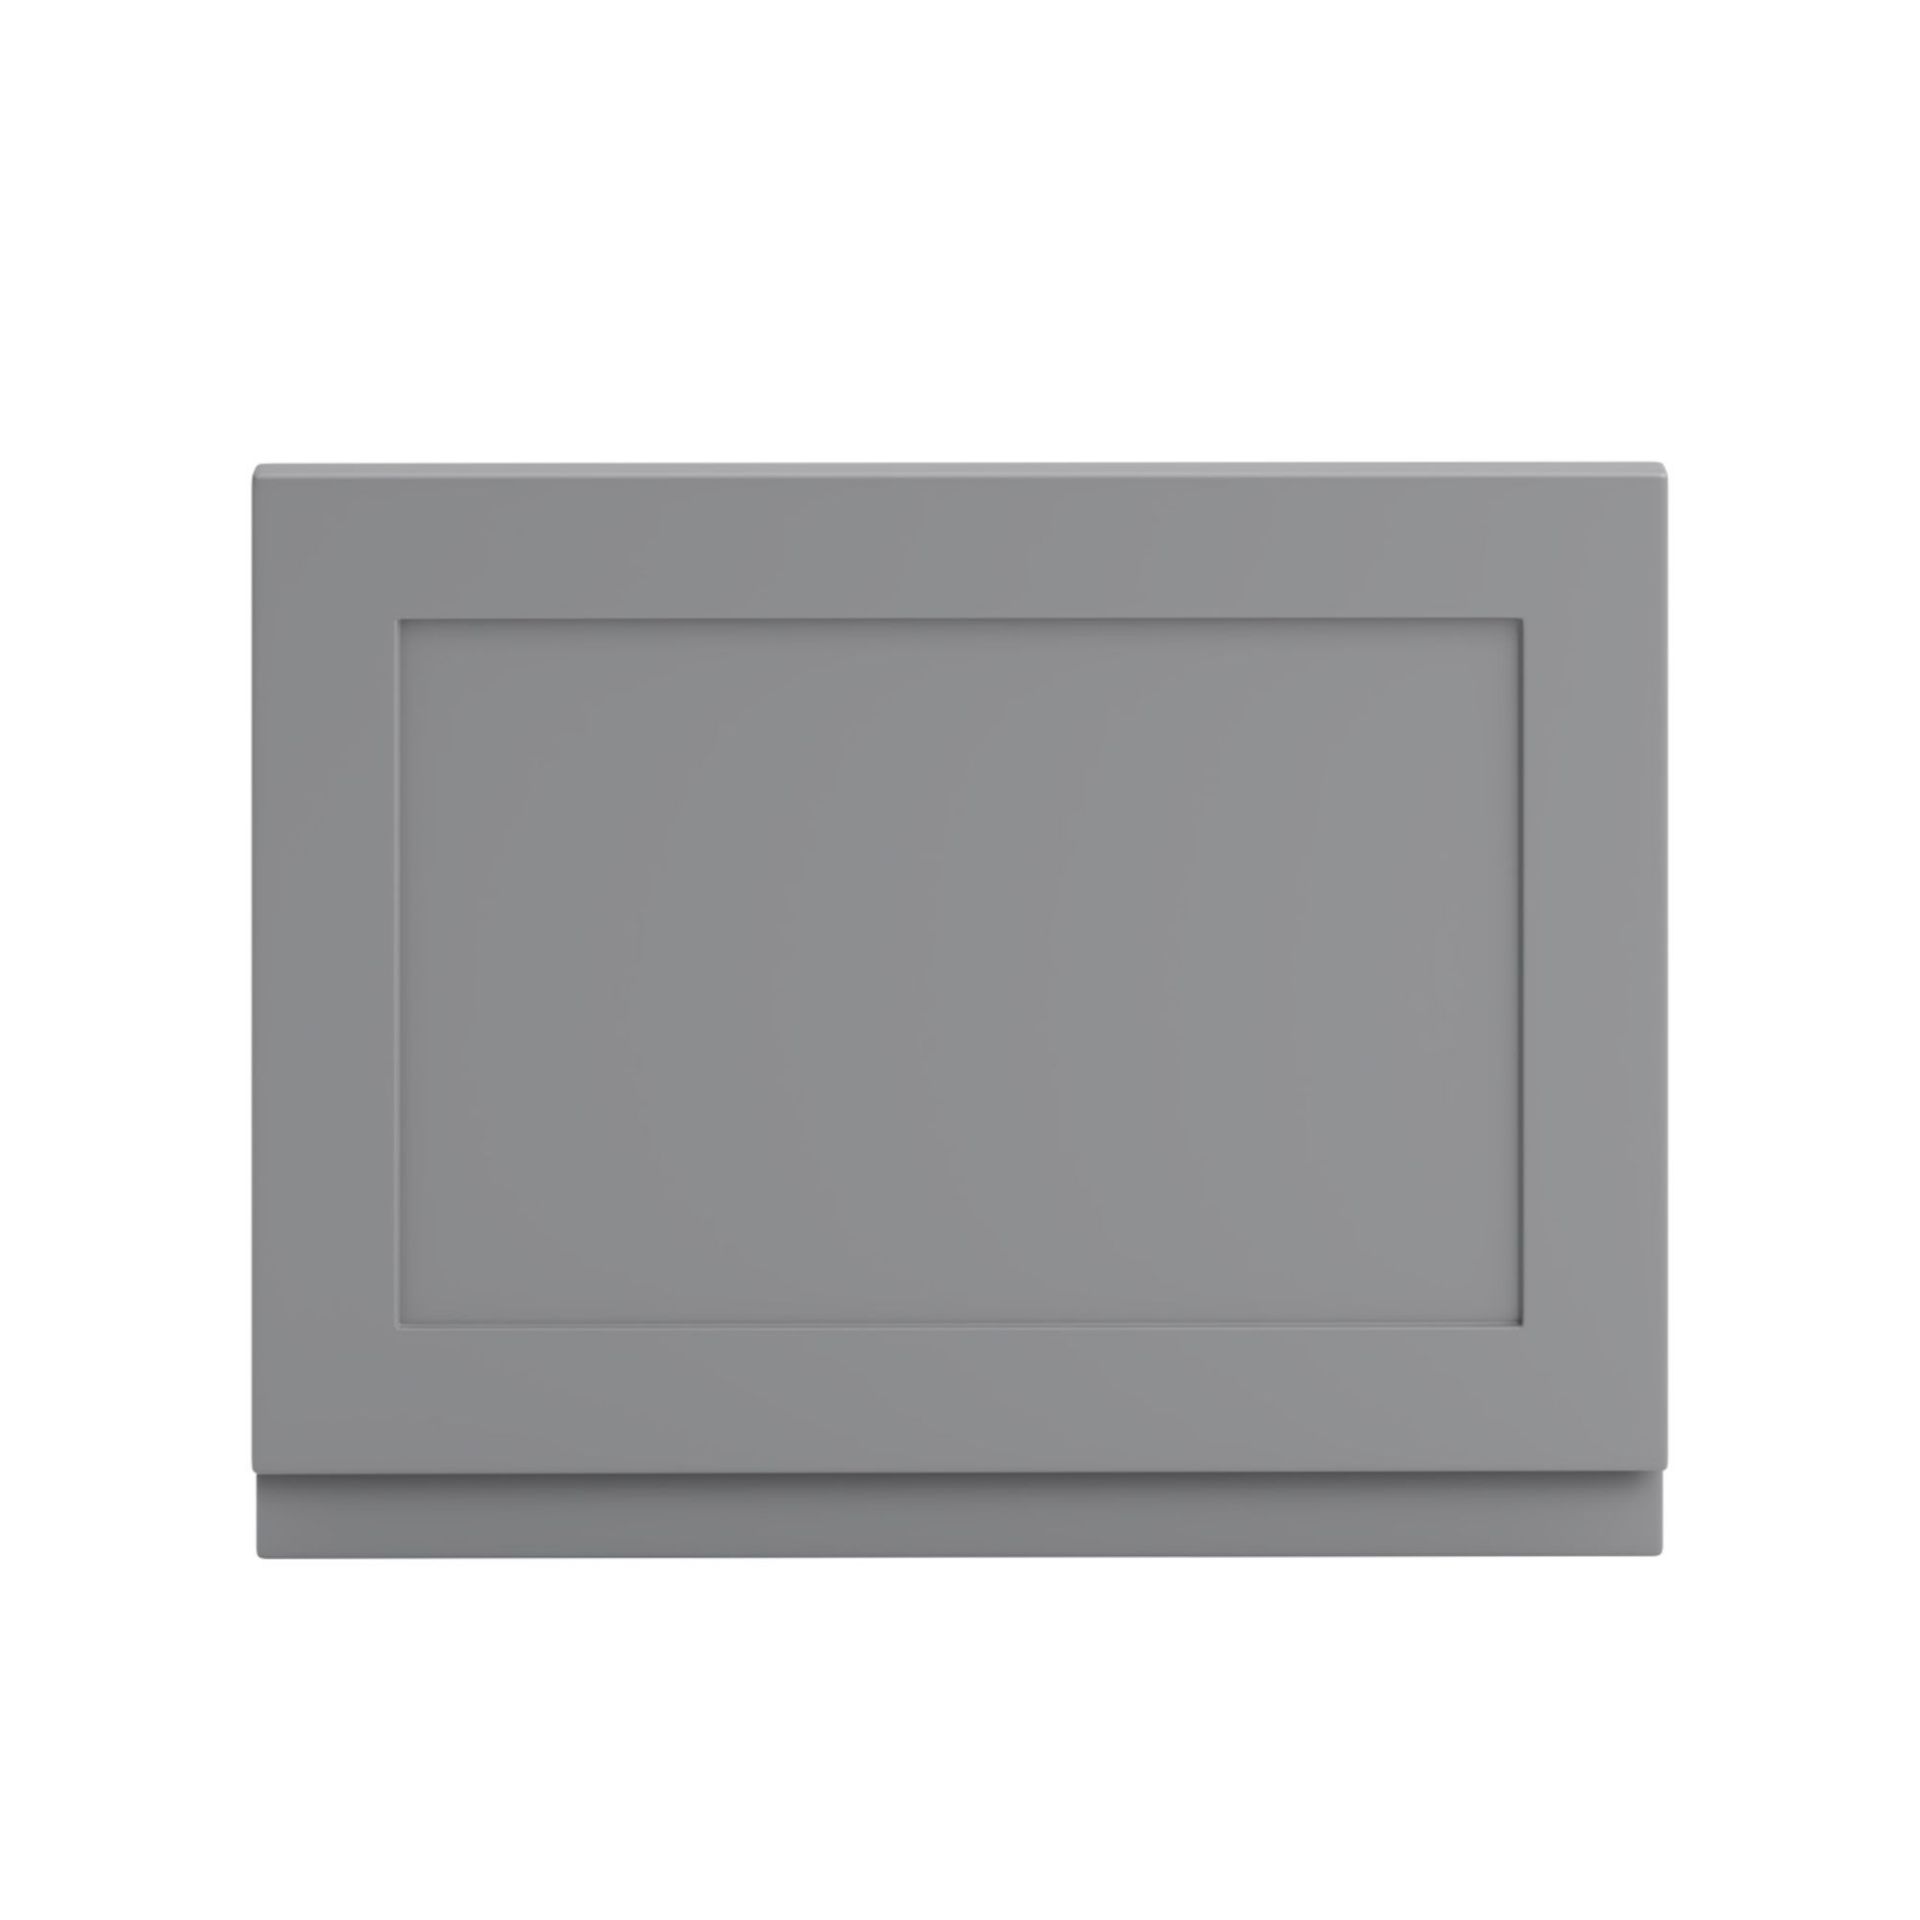 (OS273) 700mm Melbourne Bath End Panel - Earl Grey. Traditional Earl Grey matte finish Part of the